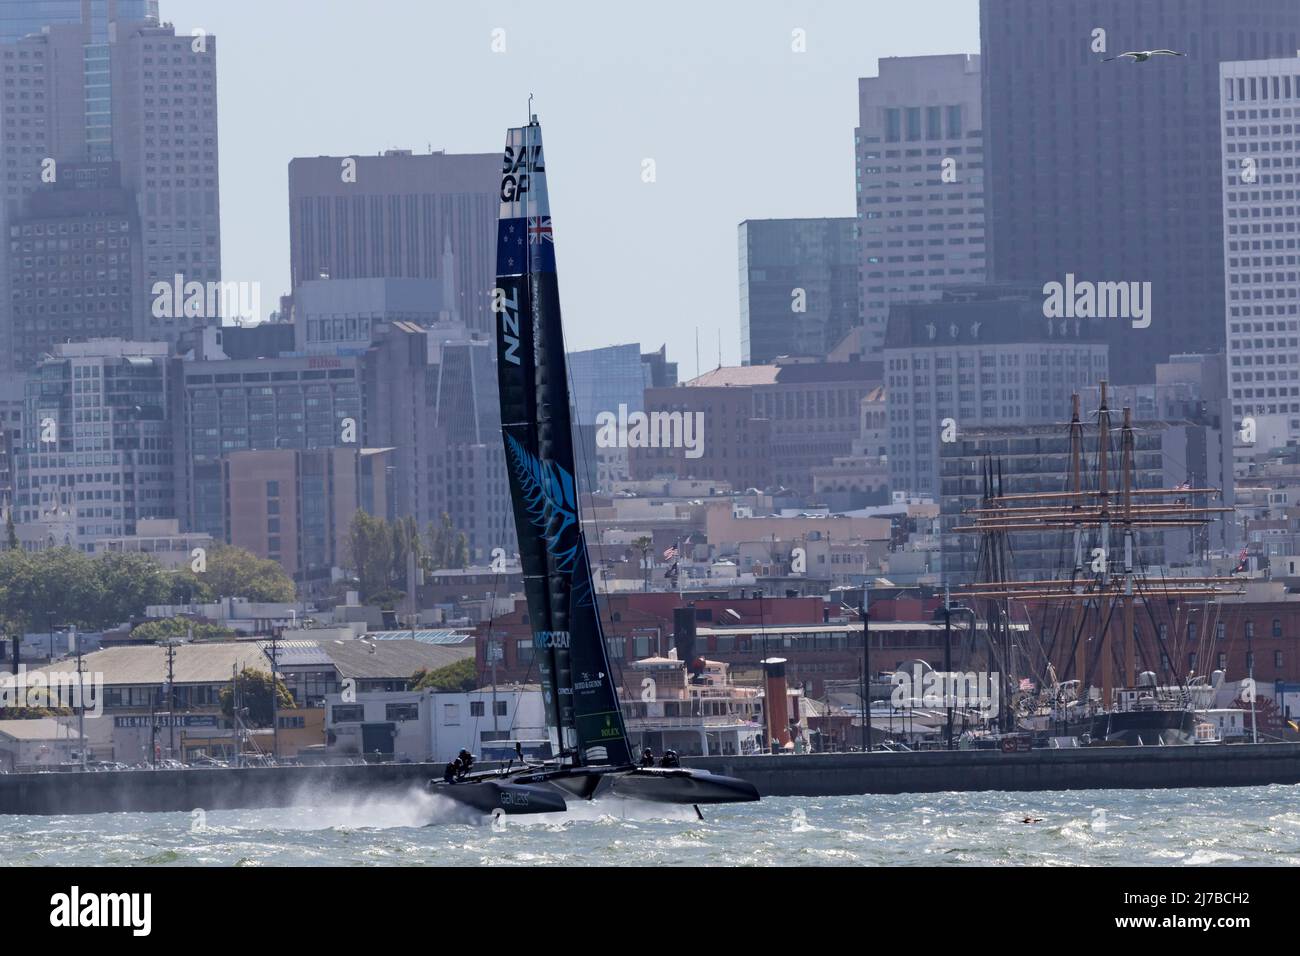 The New Zealand team races their F50 catamaran on the waters of San Francisco Bay during the 2022 SailGP races. Stock Photo